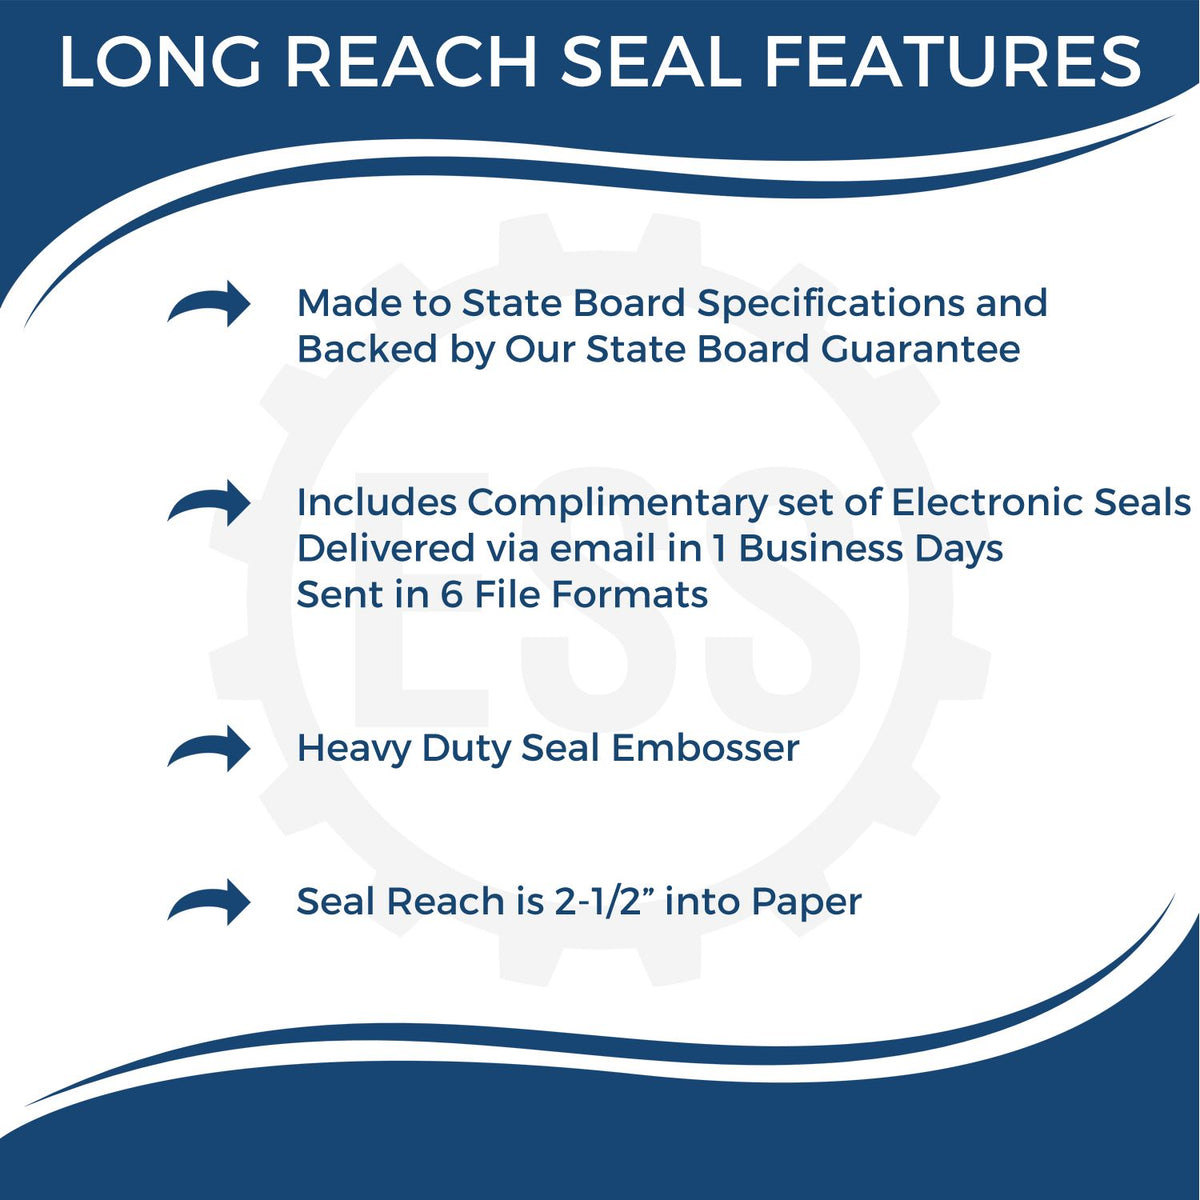 A picture of an infographic highlighting the selling points for the Long Reach Maryland Geology Seal